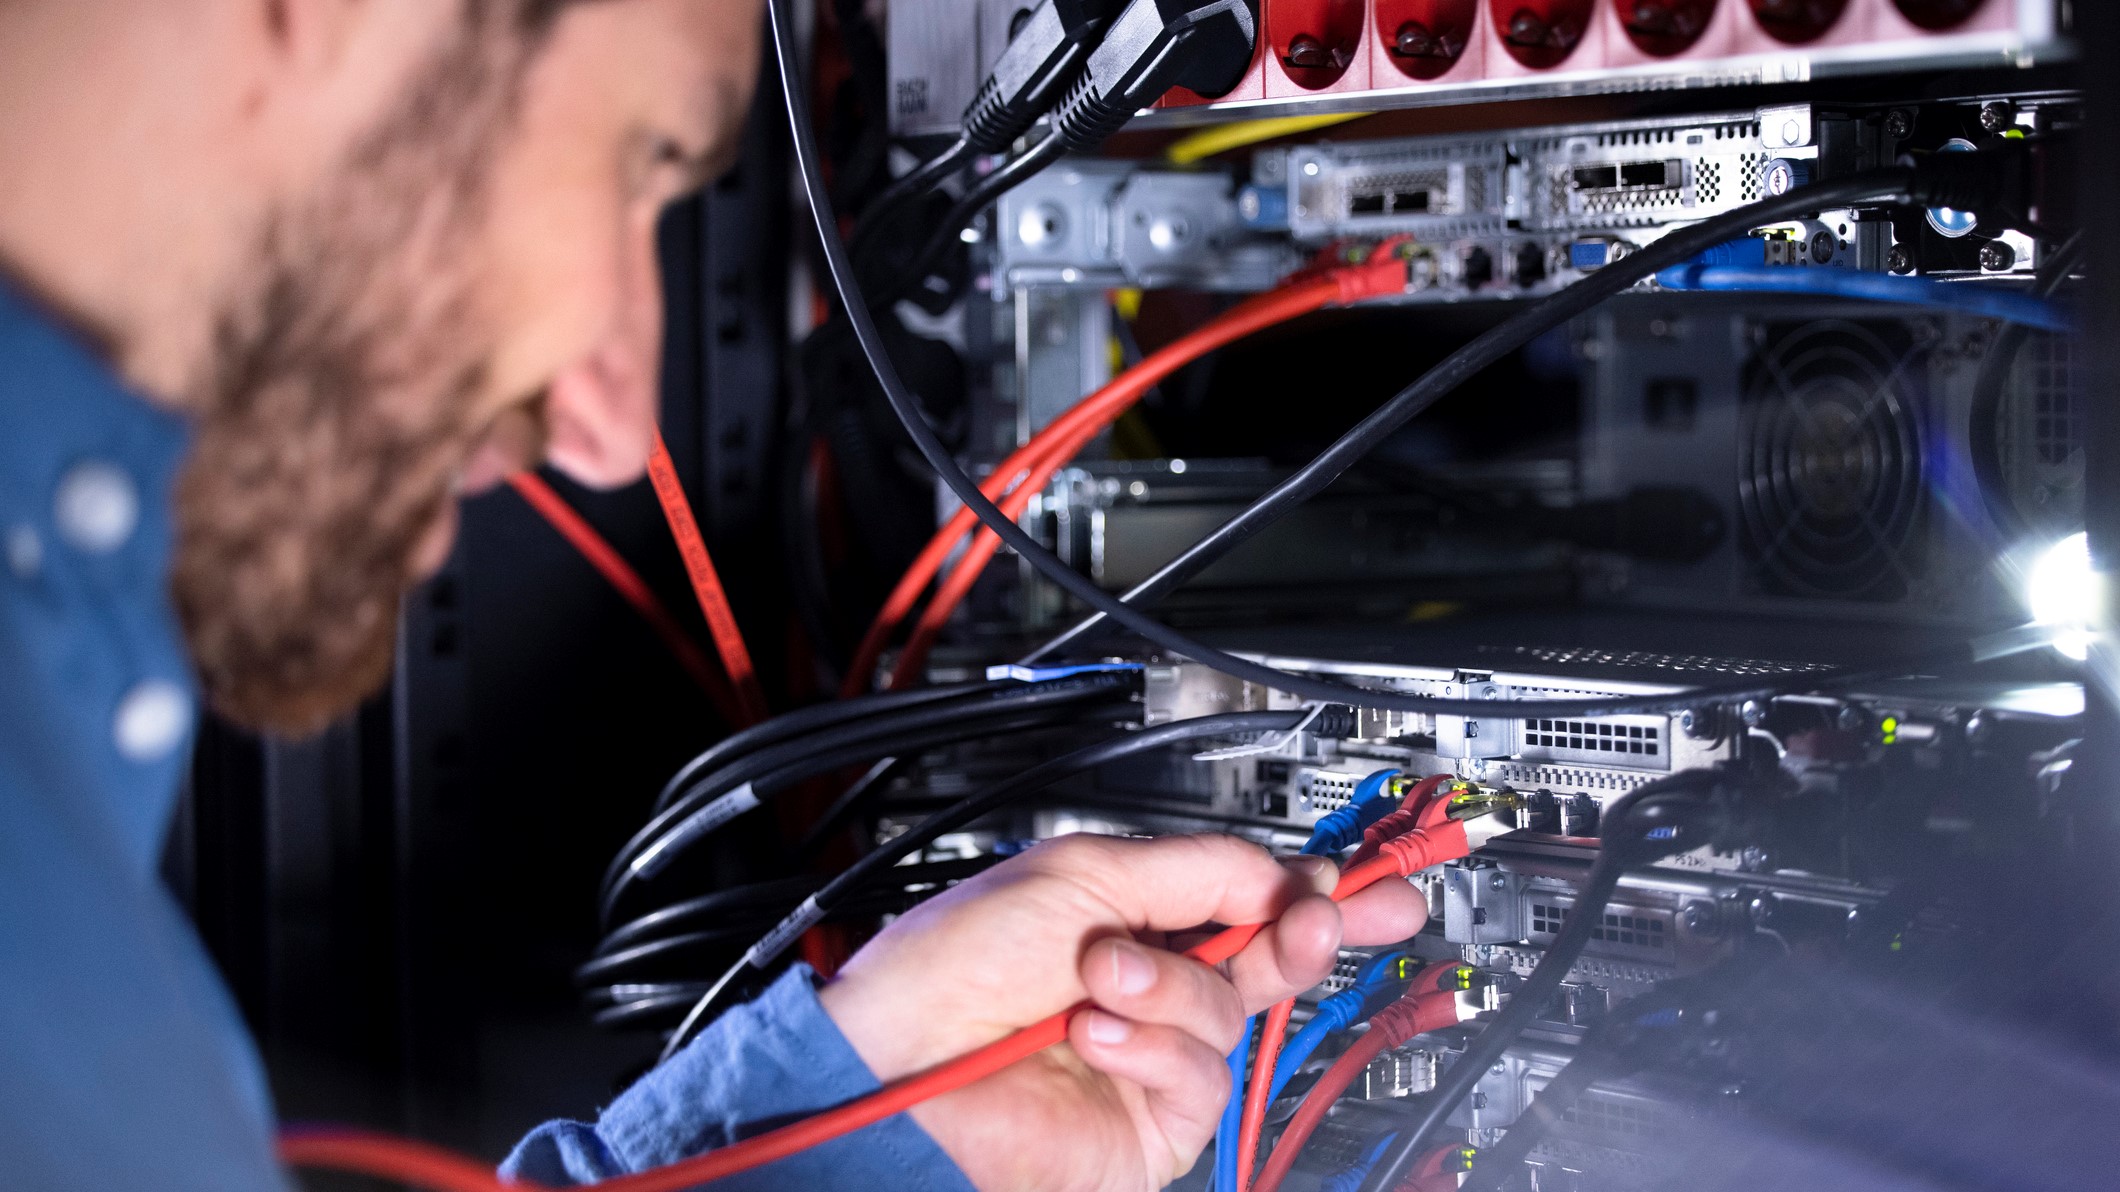 IT specialist installing patch cord cable in server rack in data center